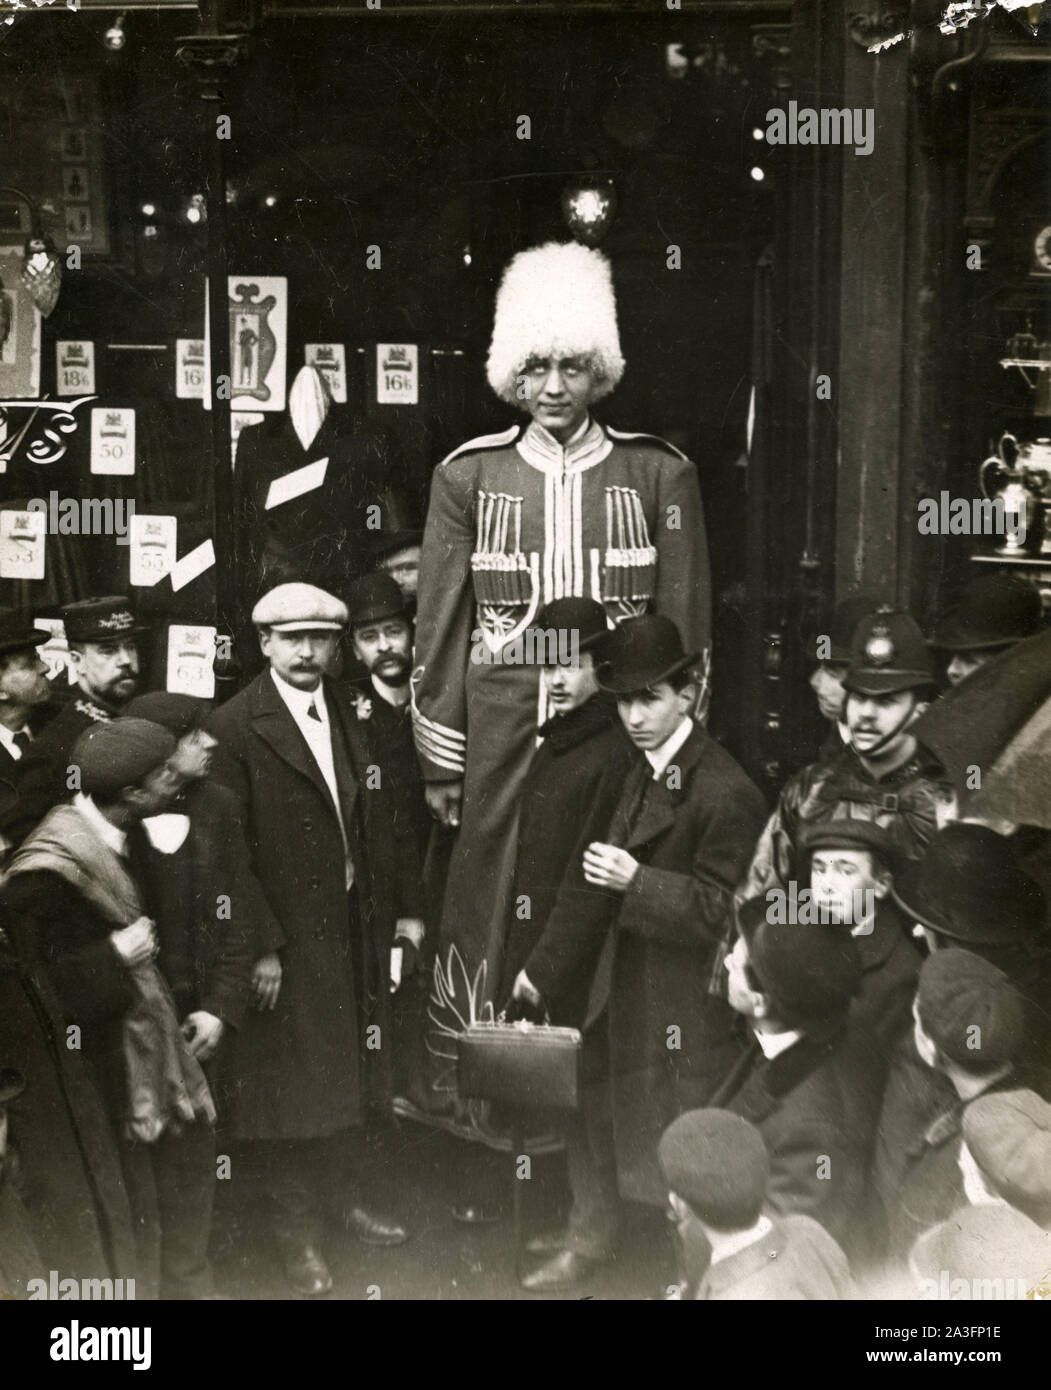 Ivan Markoff, who was famous as a Russian cossack giant in the early 20th  century. Markoff is seen in London where the caption says he was being  fitted for a new suit.